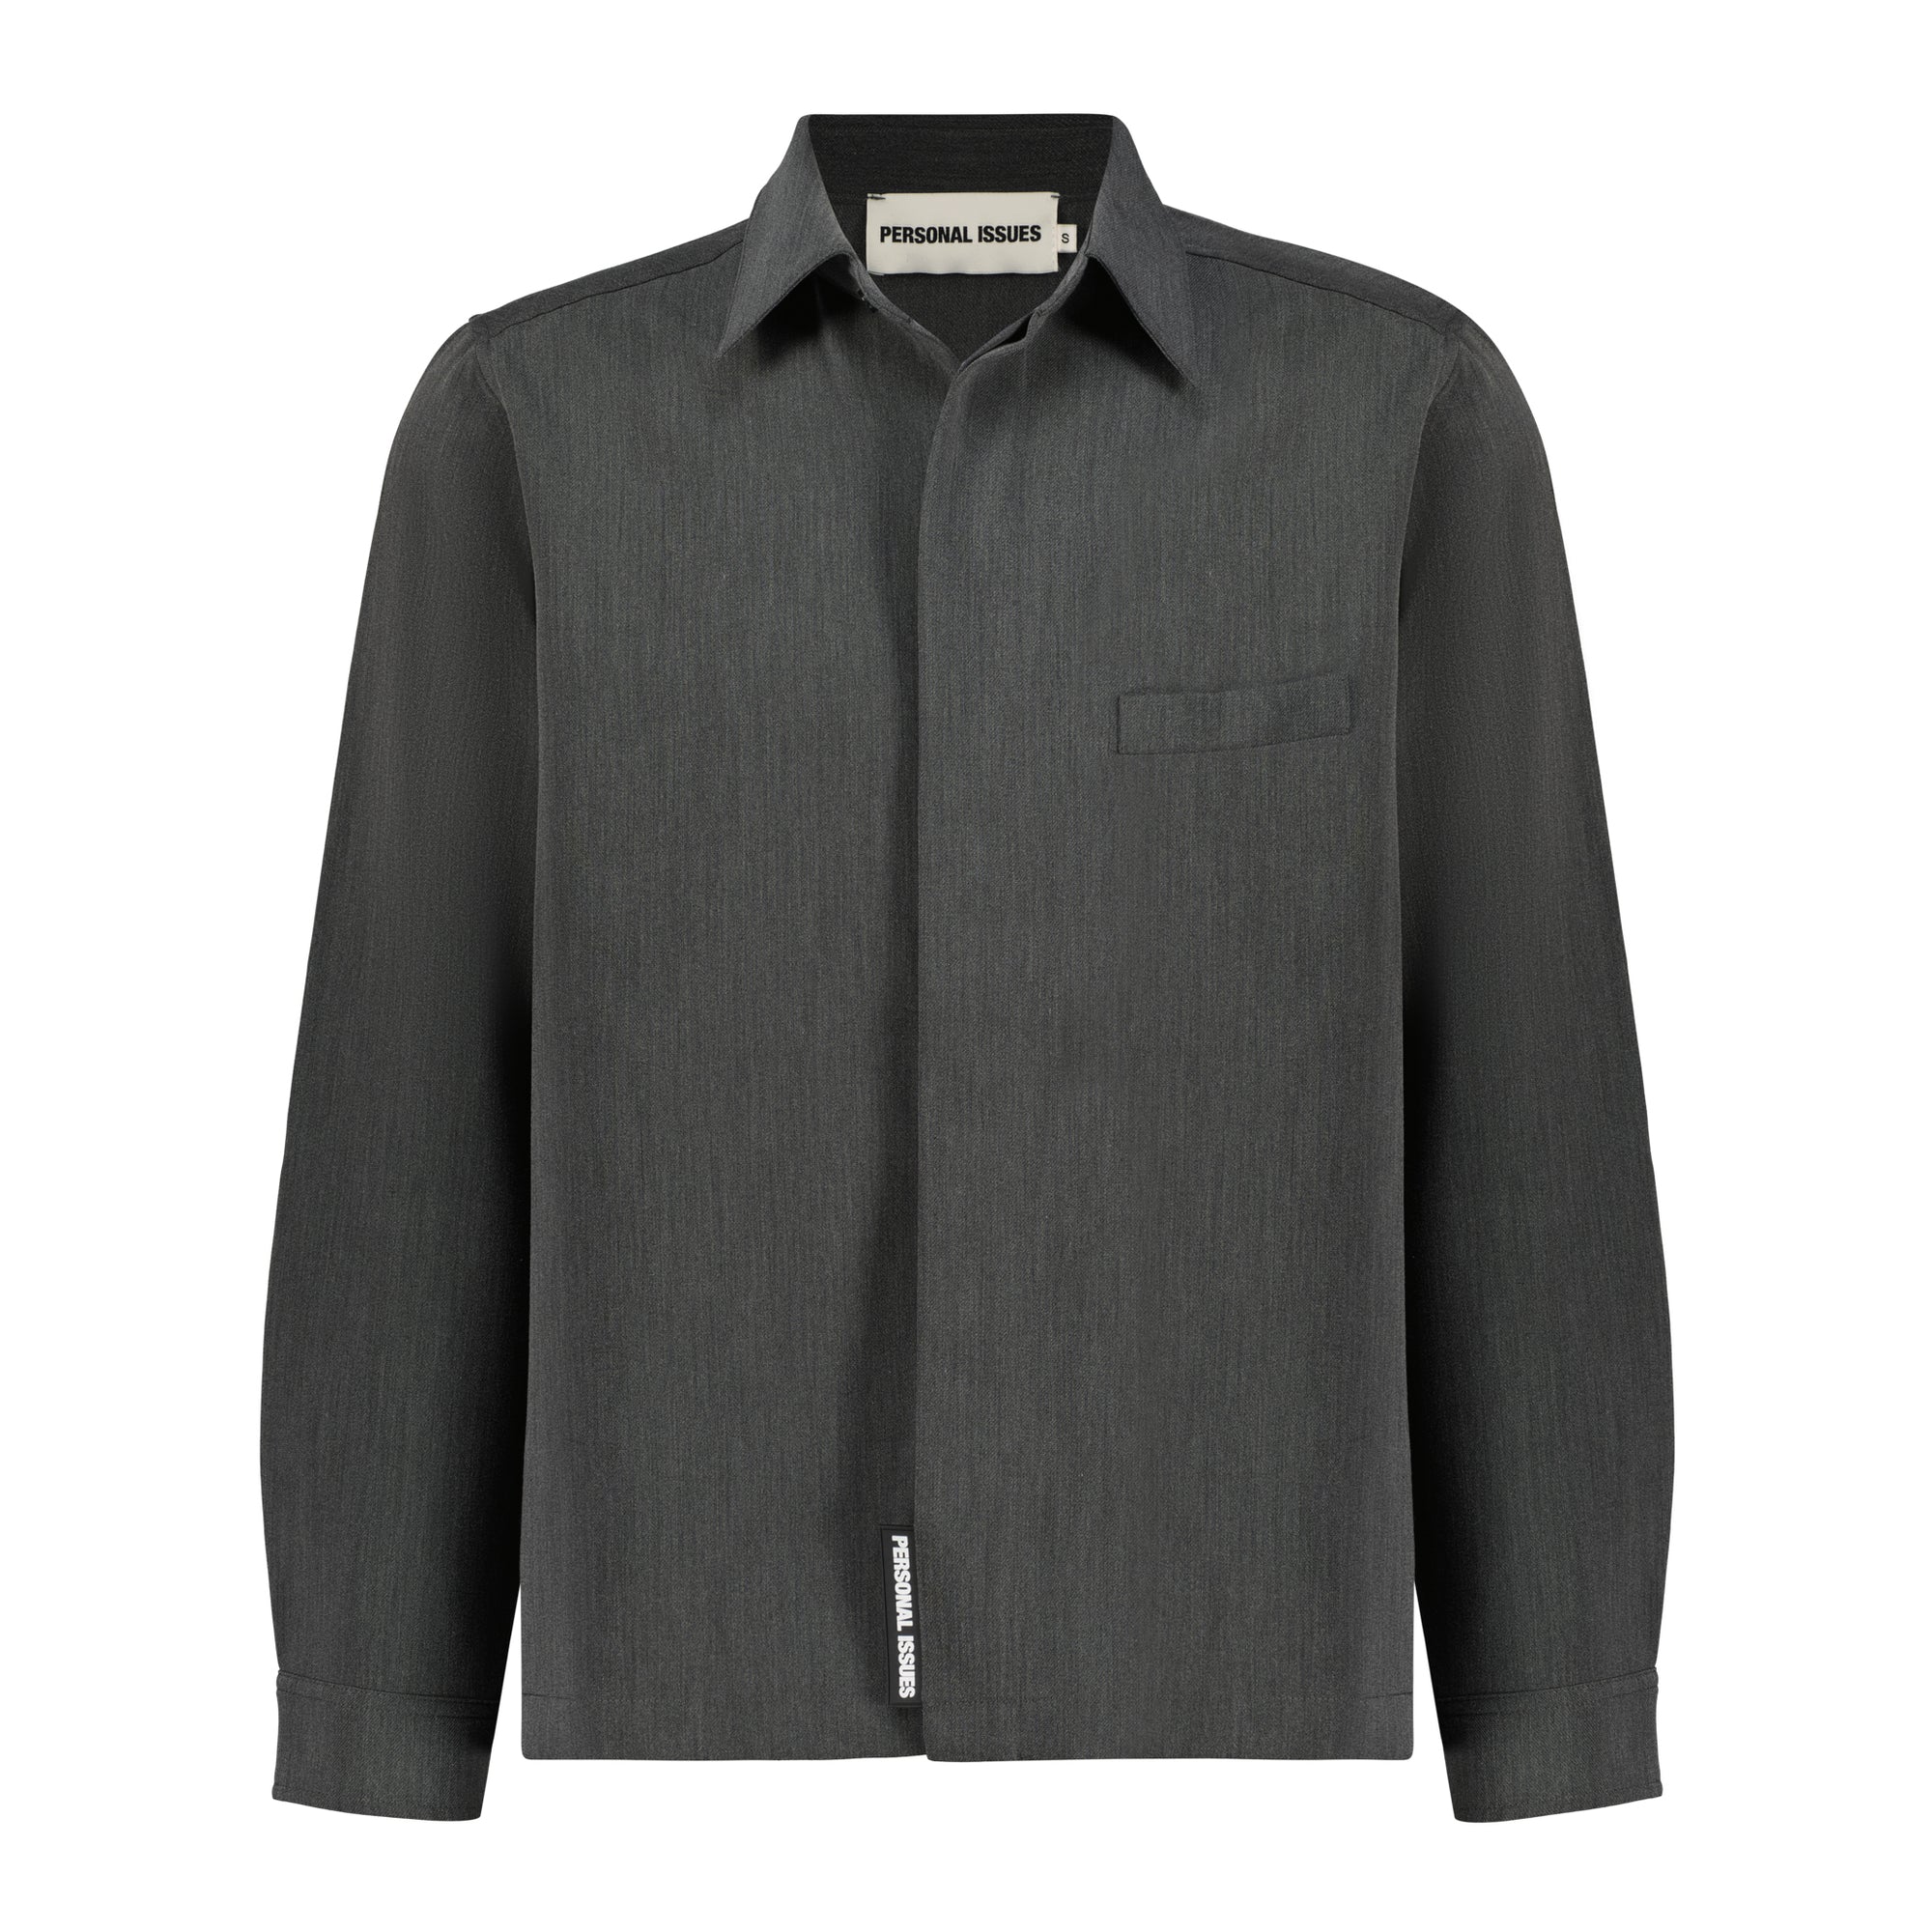 Personal Issues Loose Fit Shirt - Dark Grey